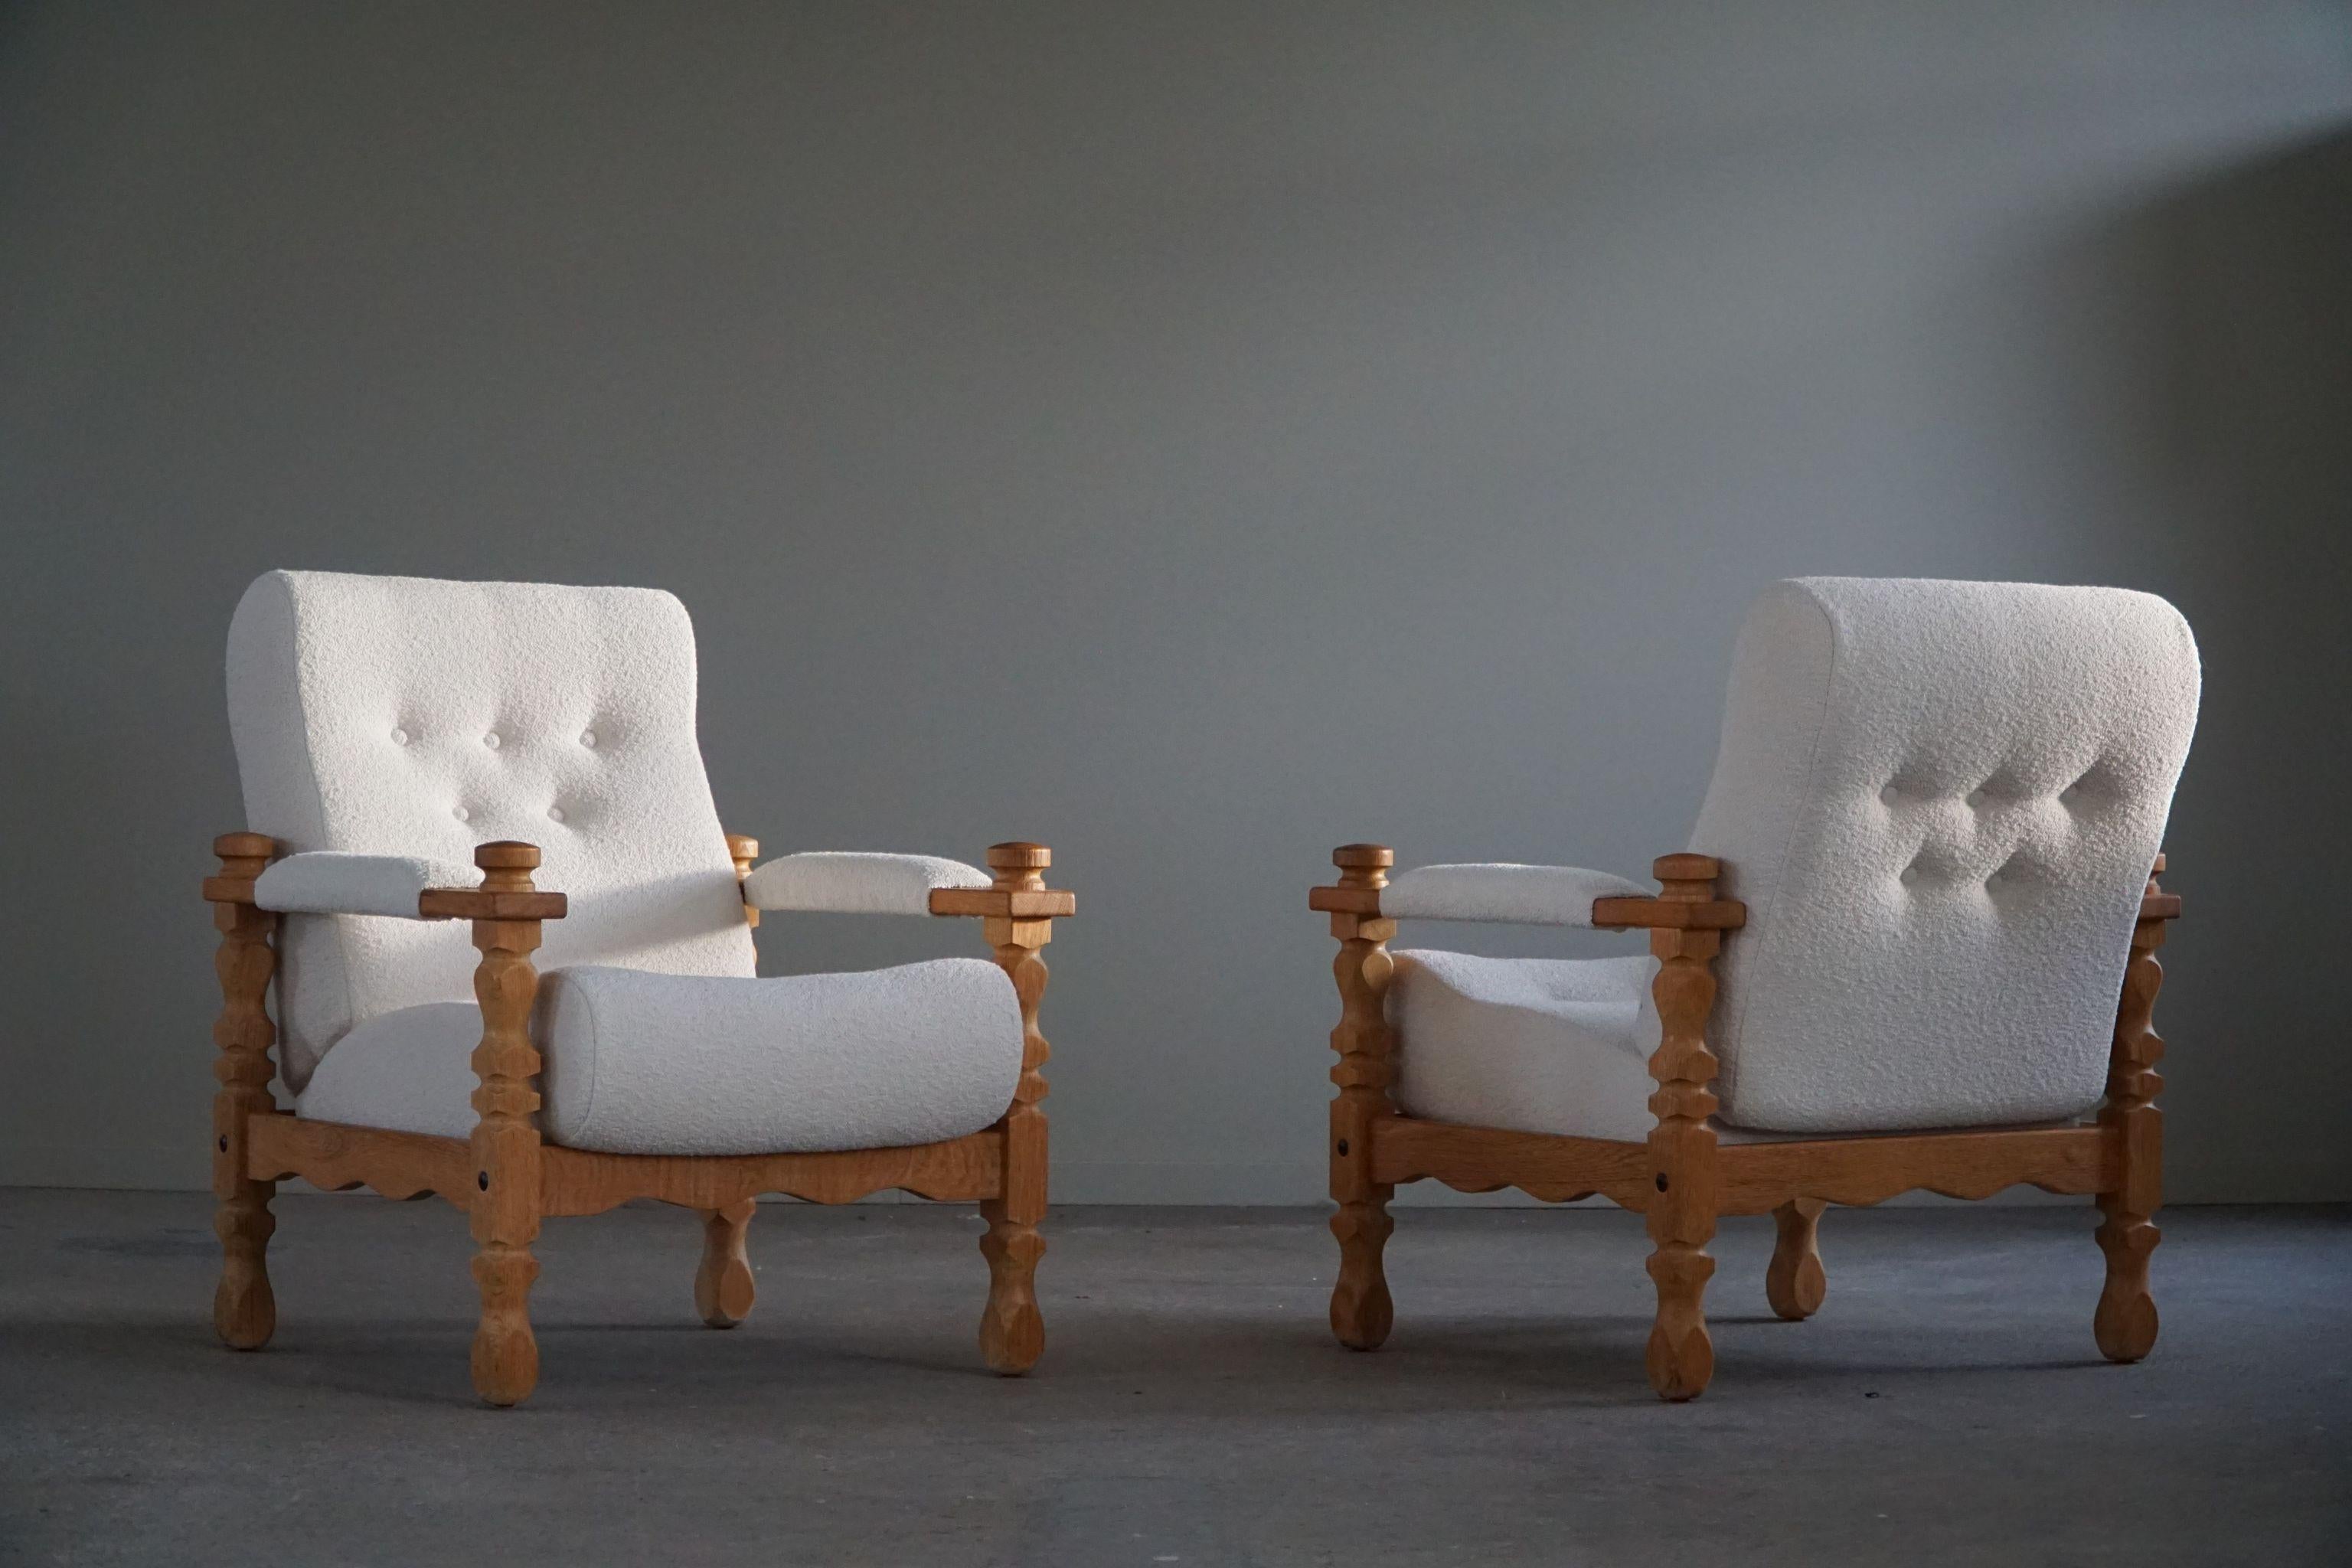 Such an intriguing sculptural pair of Danish modern lounge chairs in the style of Henning (Henry) Kjærnulf. Made in oak and reupholstered in a fine eggshell bouclé wool. Made in 1960s by a Danish Cabinetmaker with a great sense for details. The